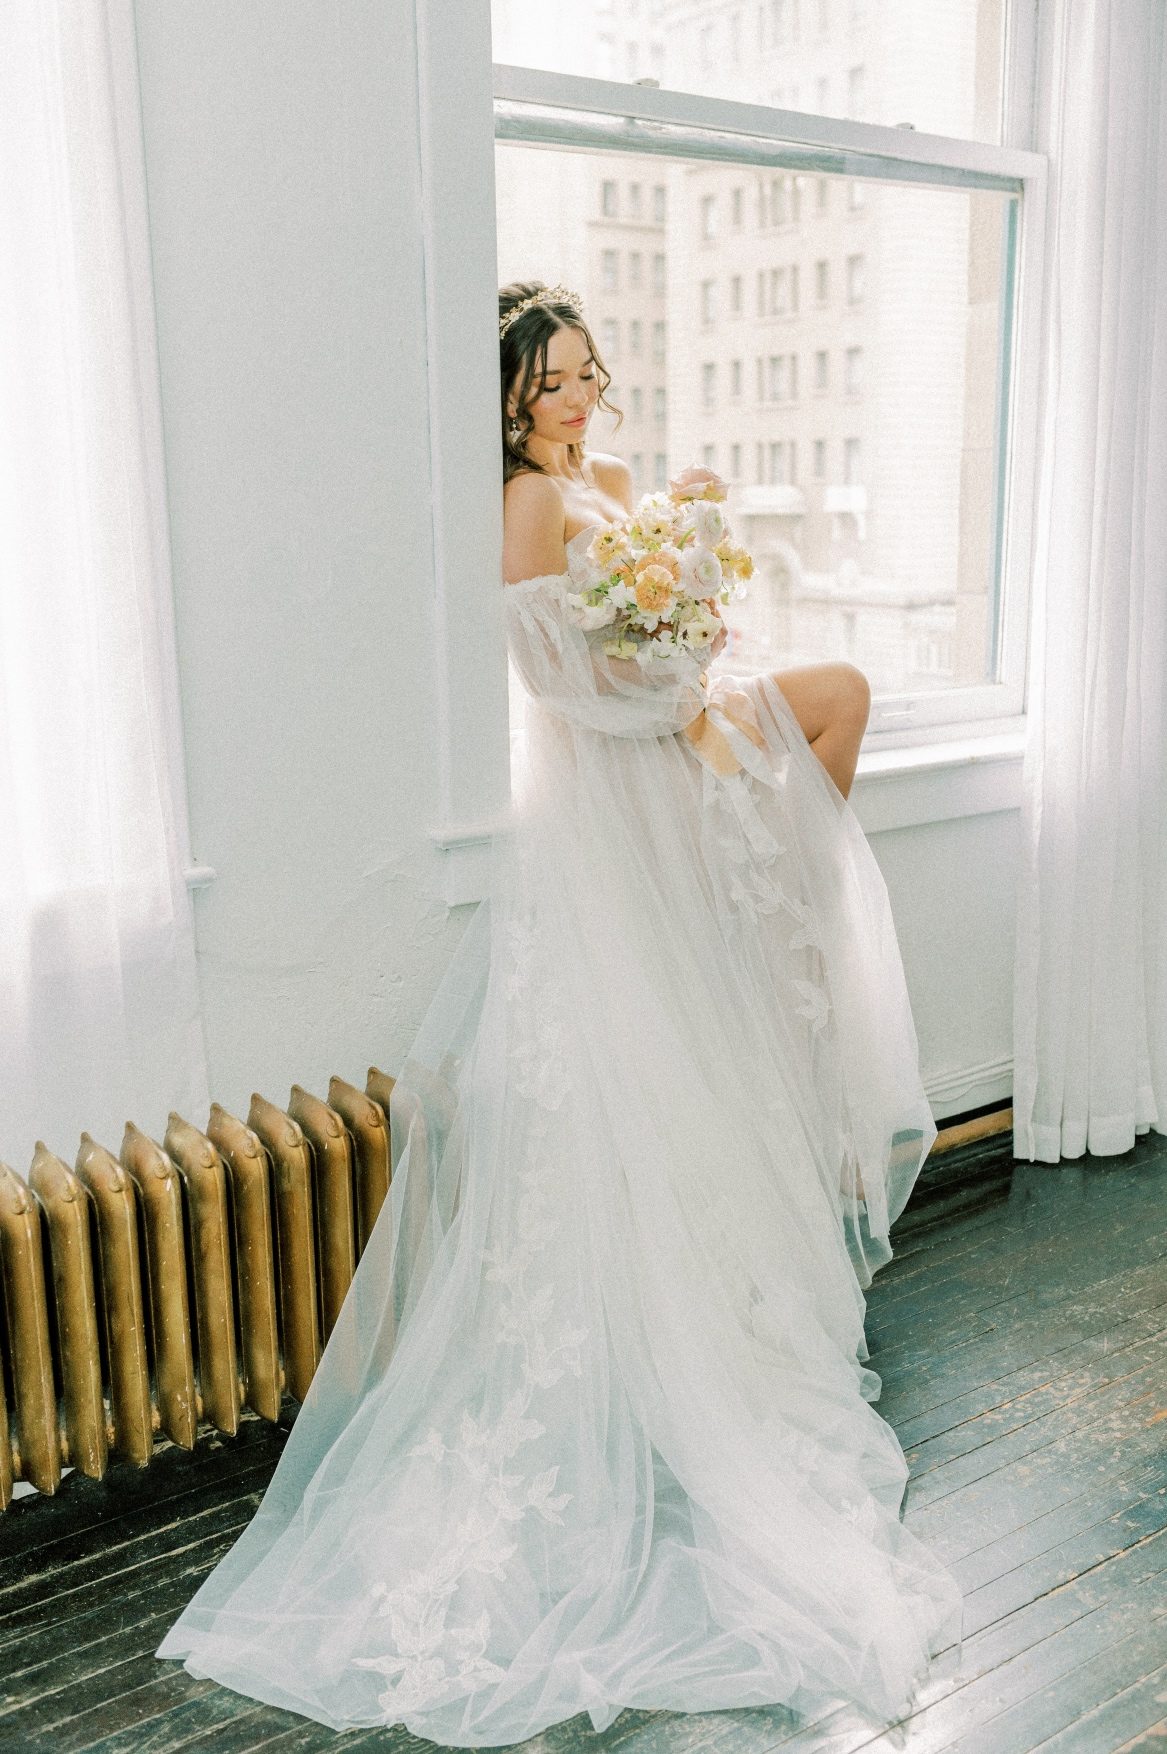 Our bride sits inside a window well, with her dress elegantly draping down. She looks down at her peach bridal bouquet